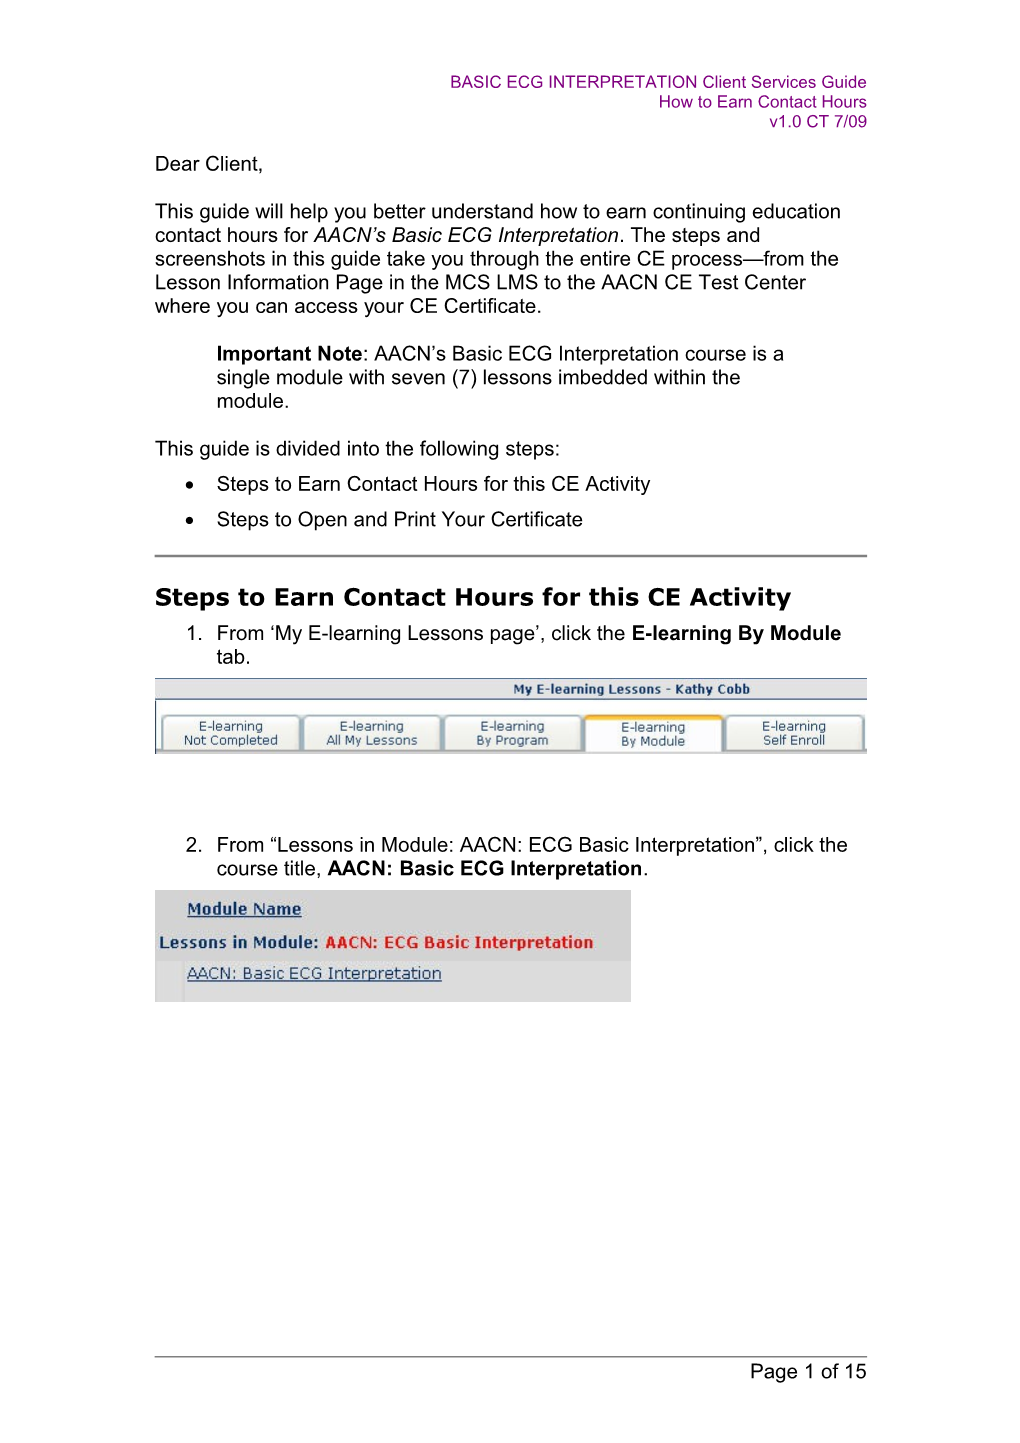 Steps to Earn Contact Hours for This CE Activity